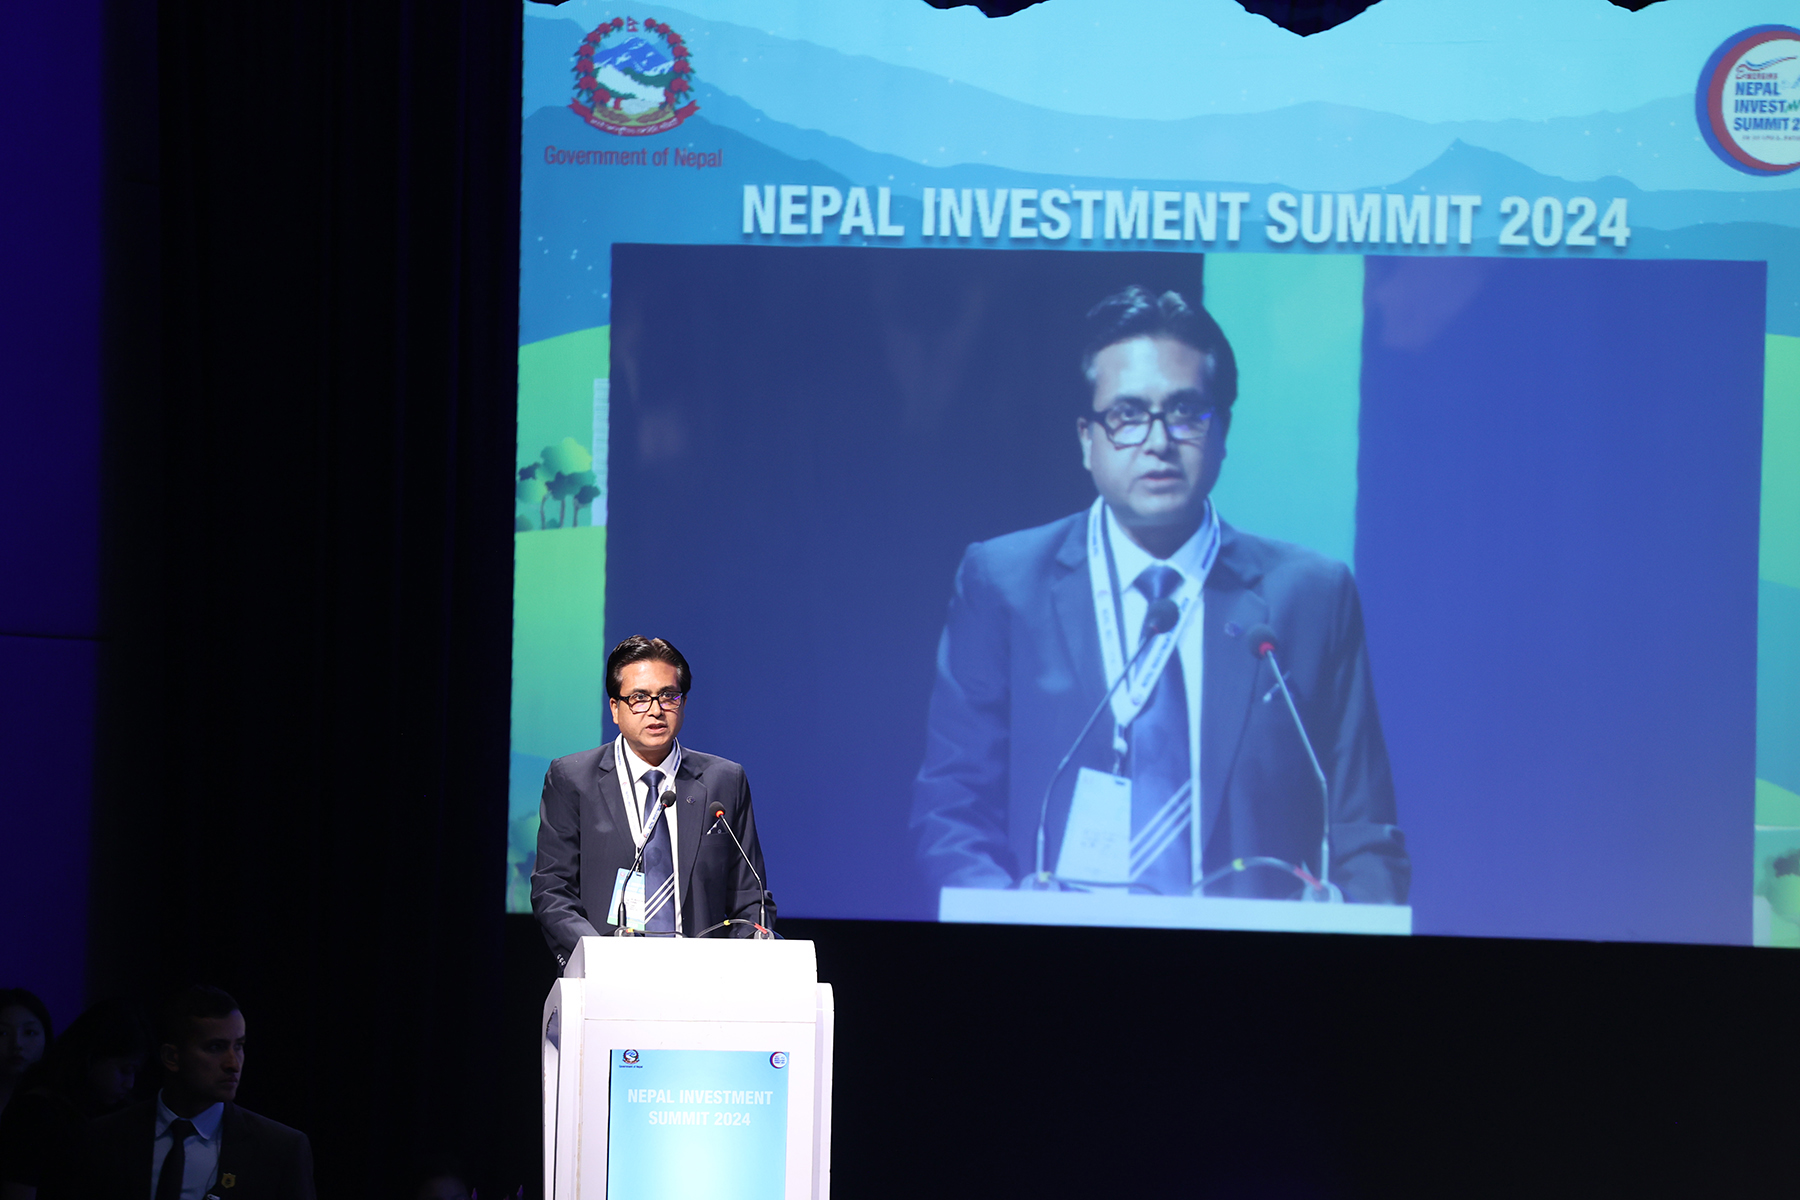 CNI President highlights Nepal’s conducive investment climate at Investment Summit